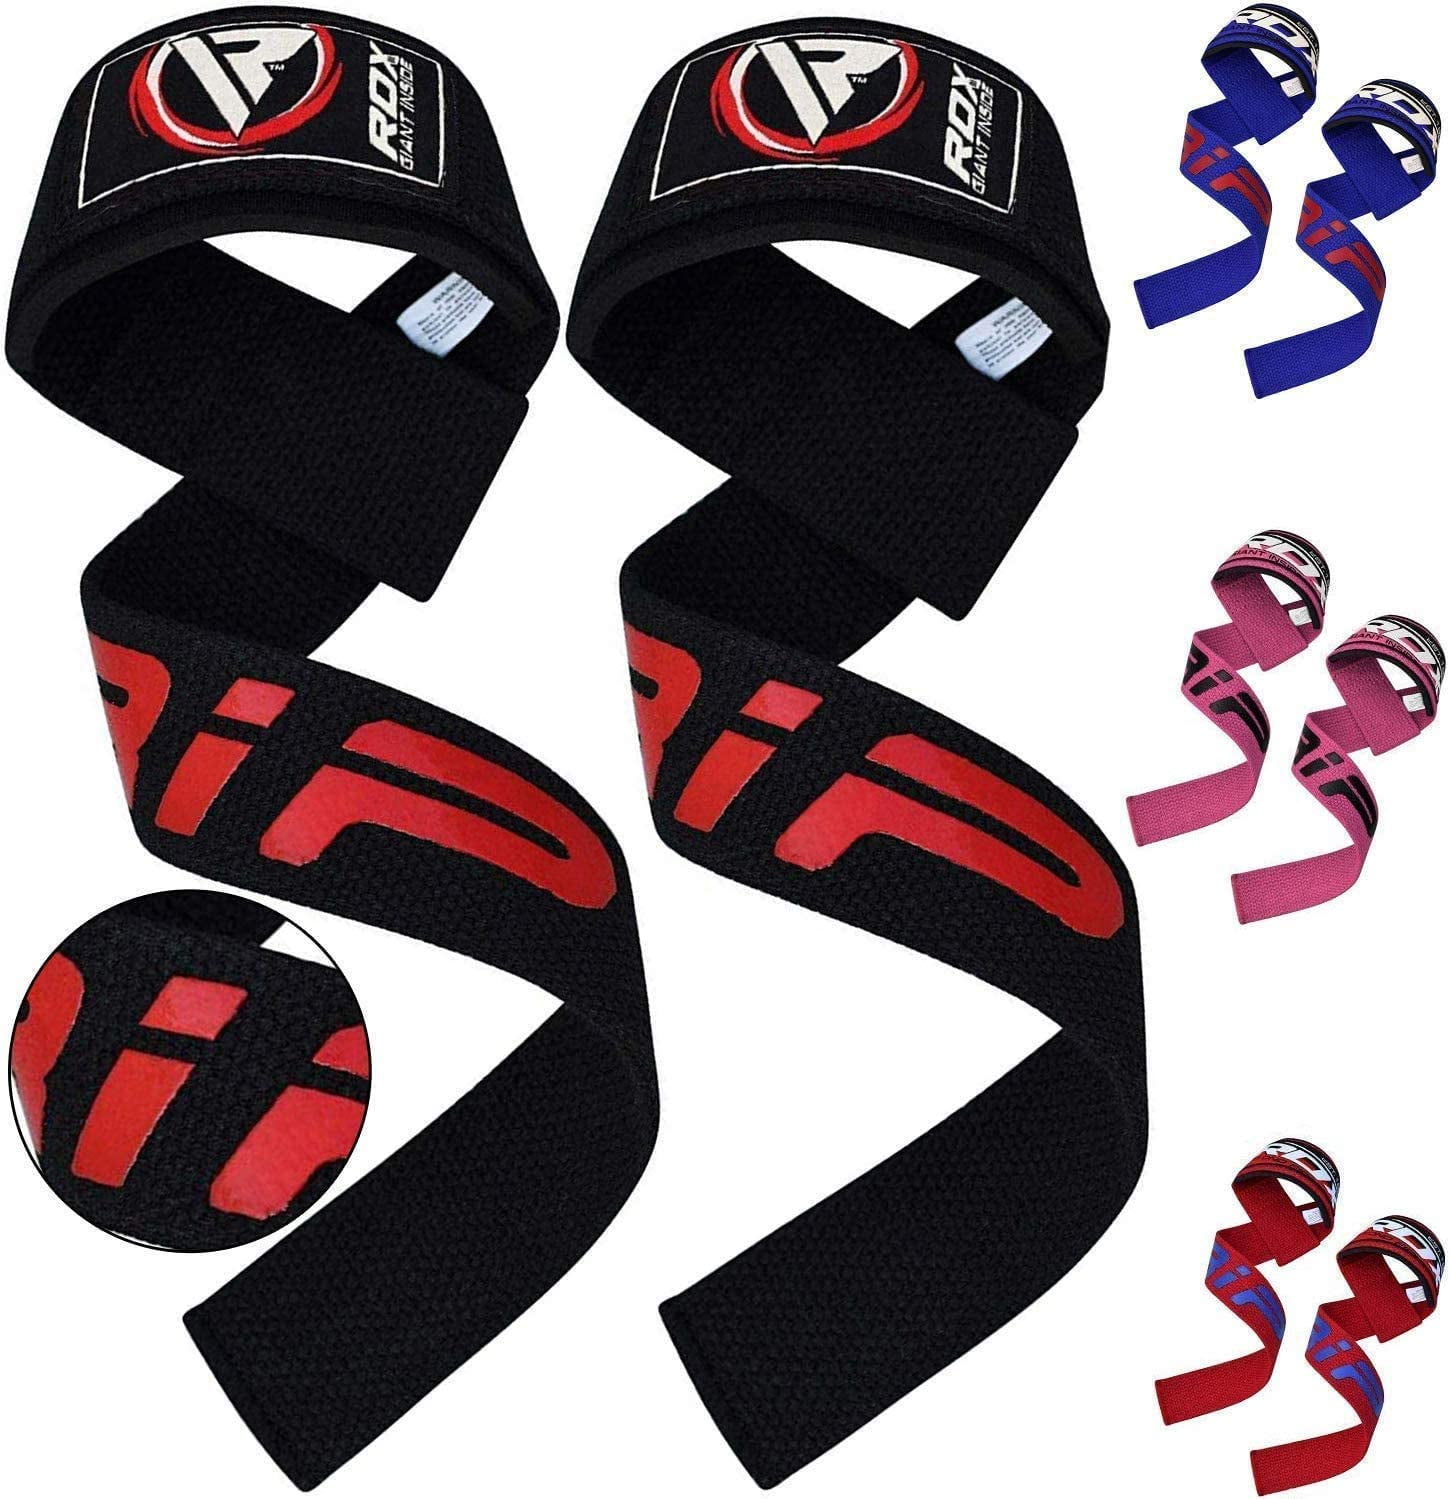 EVO Weight lifting Hook Gym Straps wrist Support Wraps grips Bodybuilding Gear 